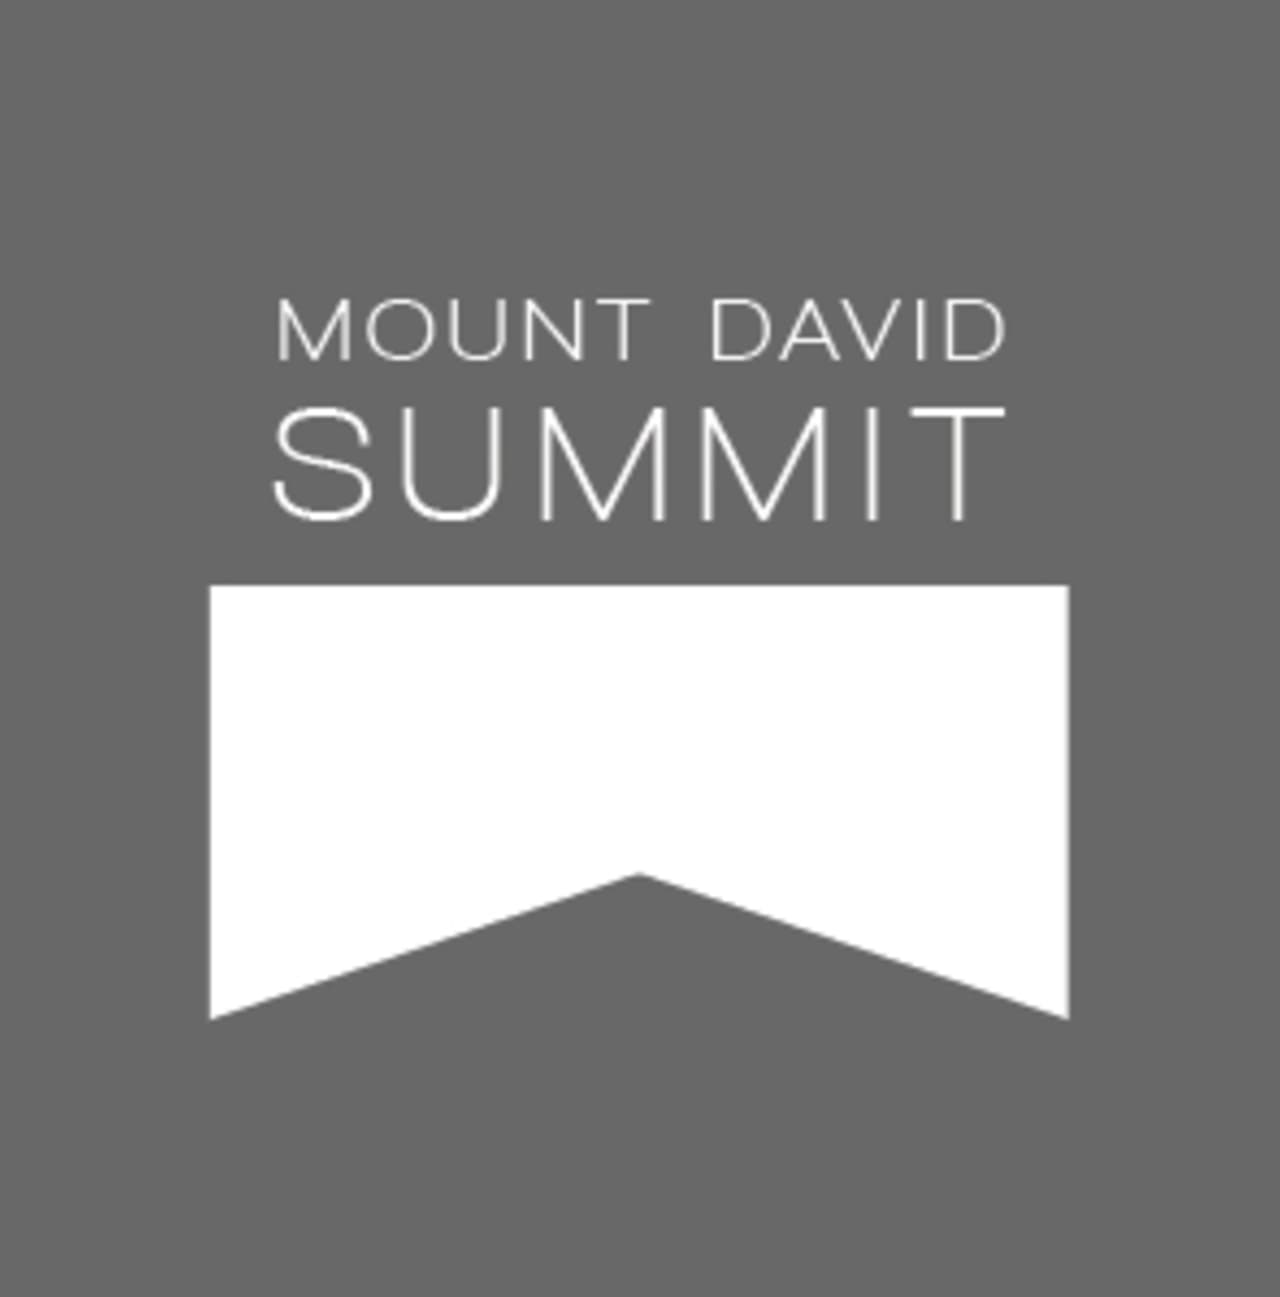 Bates student Parker Nelson presented his research project at the college's Mount David Summit.